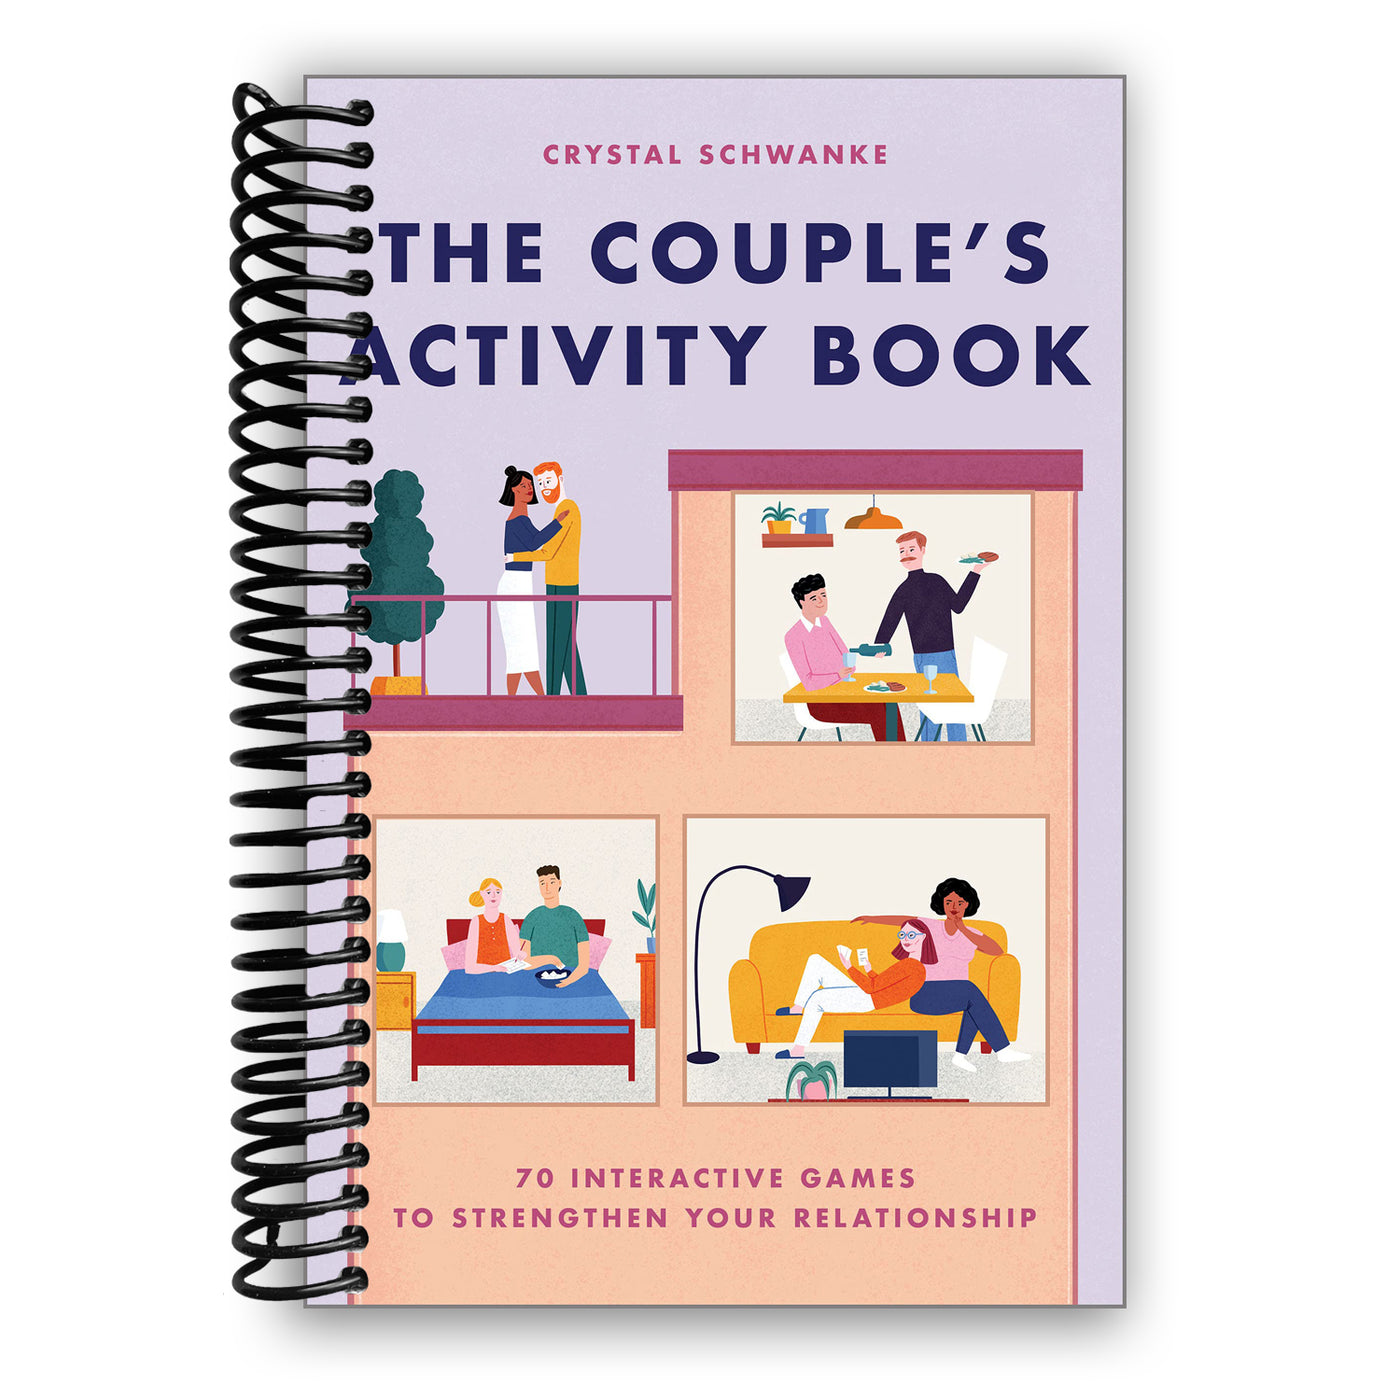 The Couple's Activity Book: 70 Interactive Games to Strengthen Your Relationship (Spiral Bound)